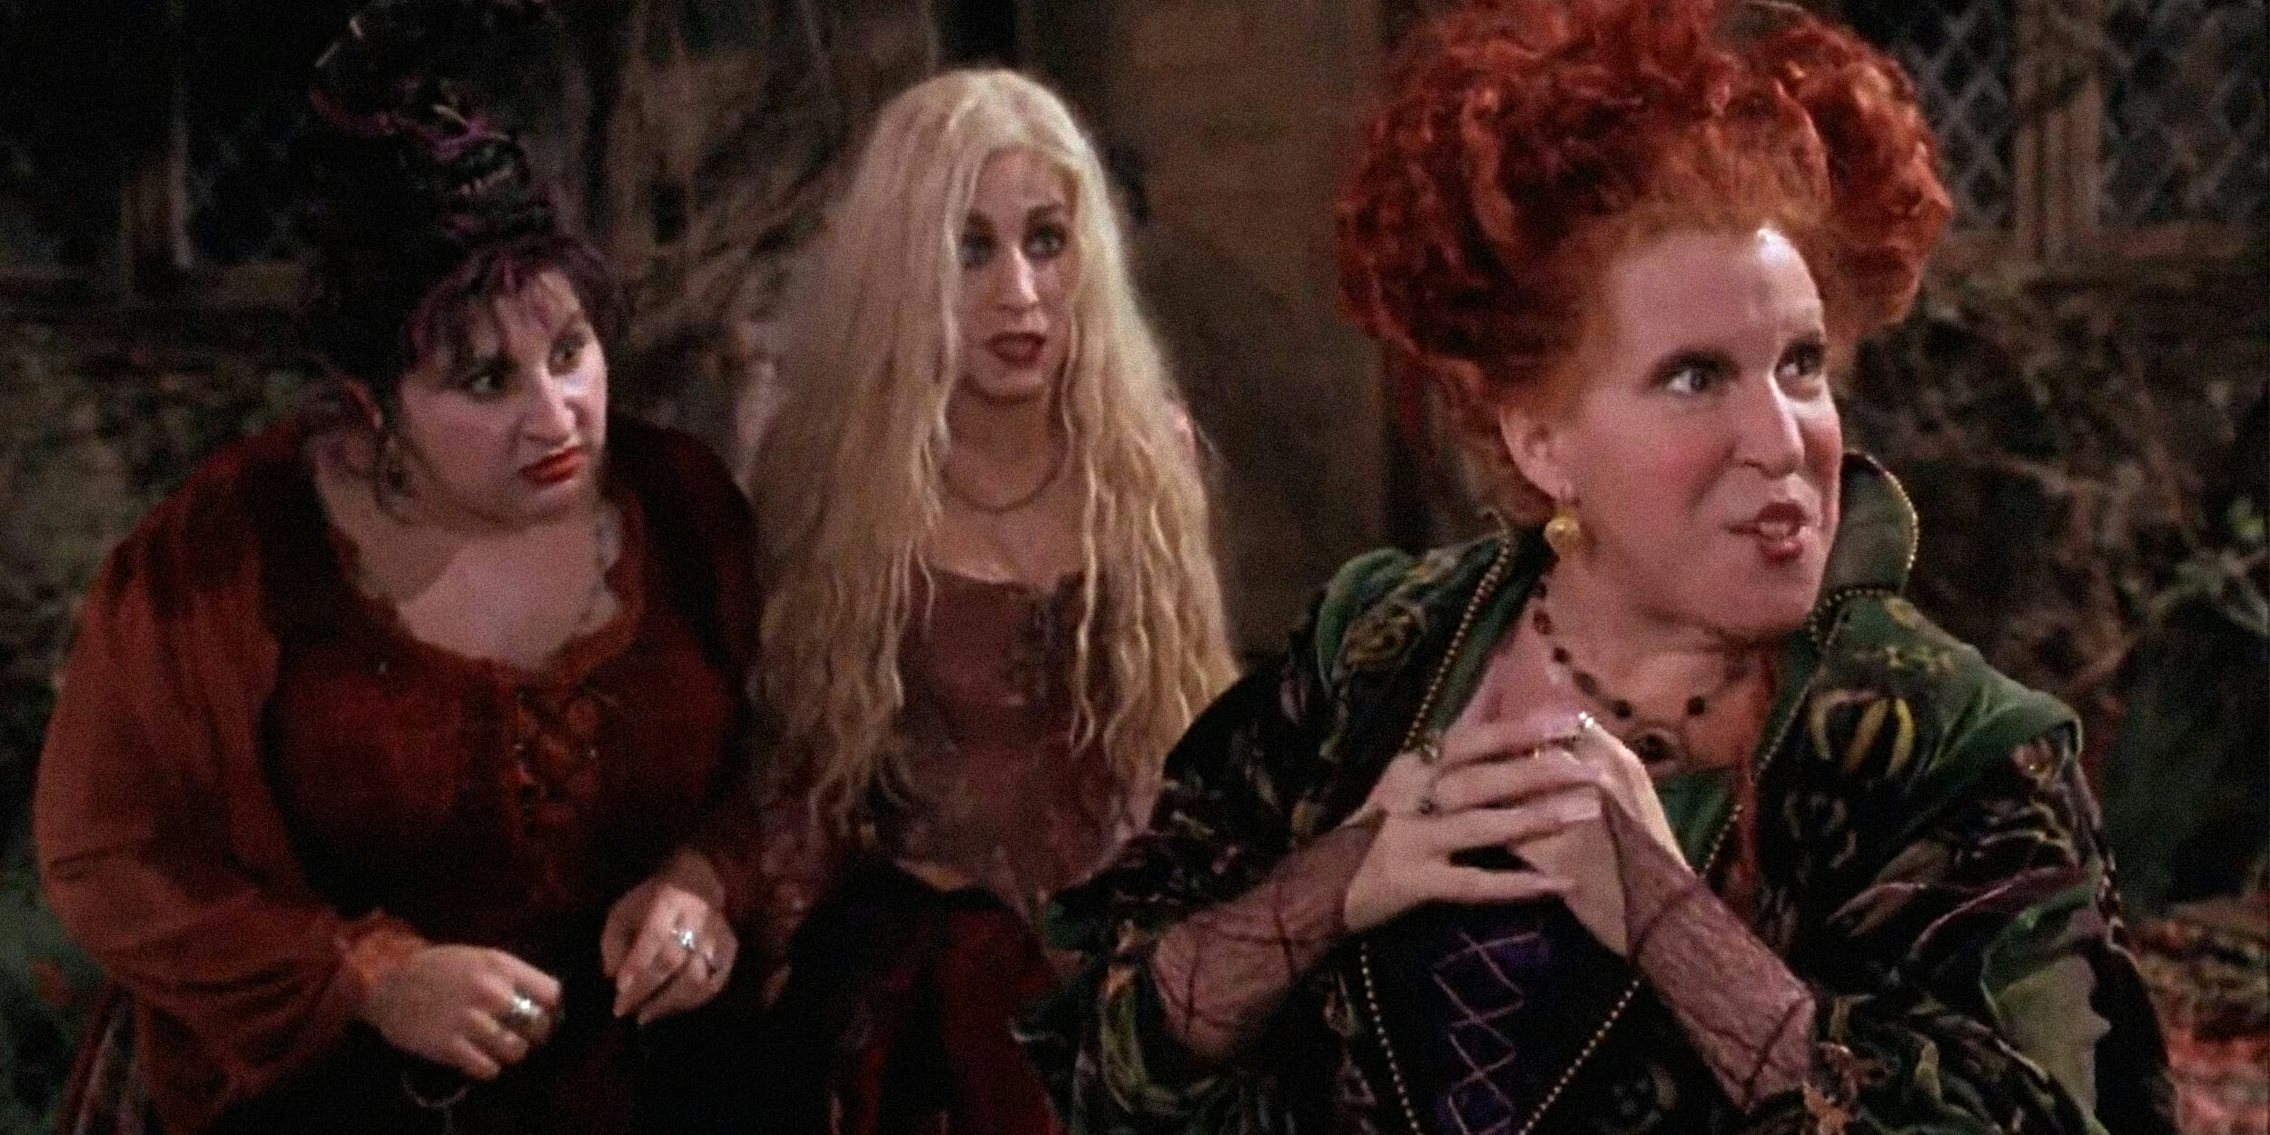 Three witch sisters from Hocus Pocus